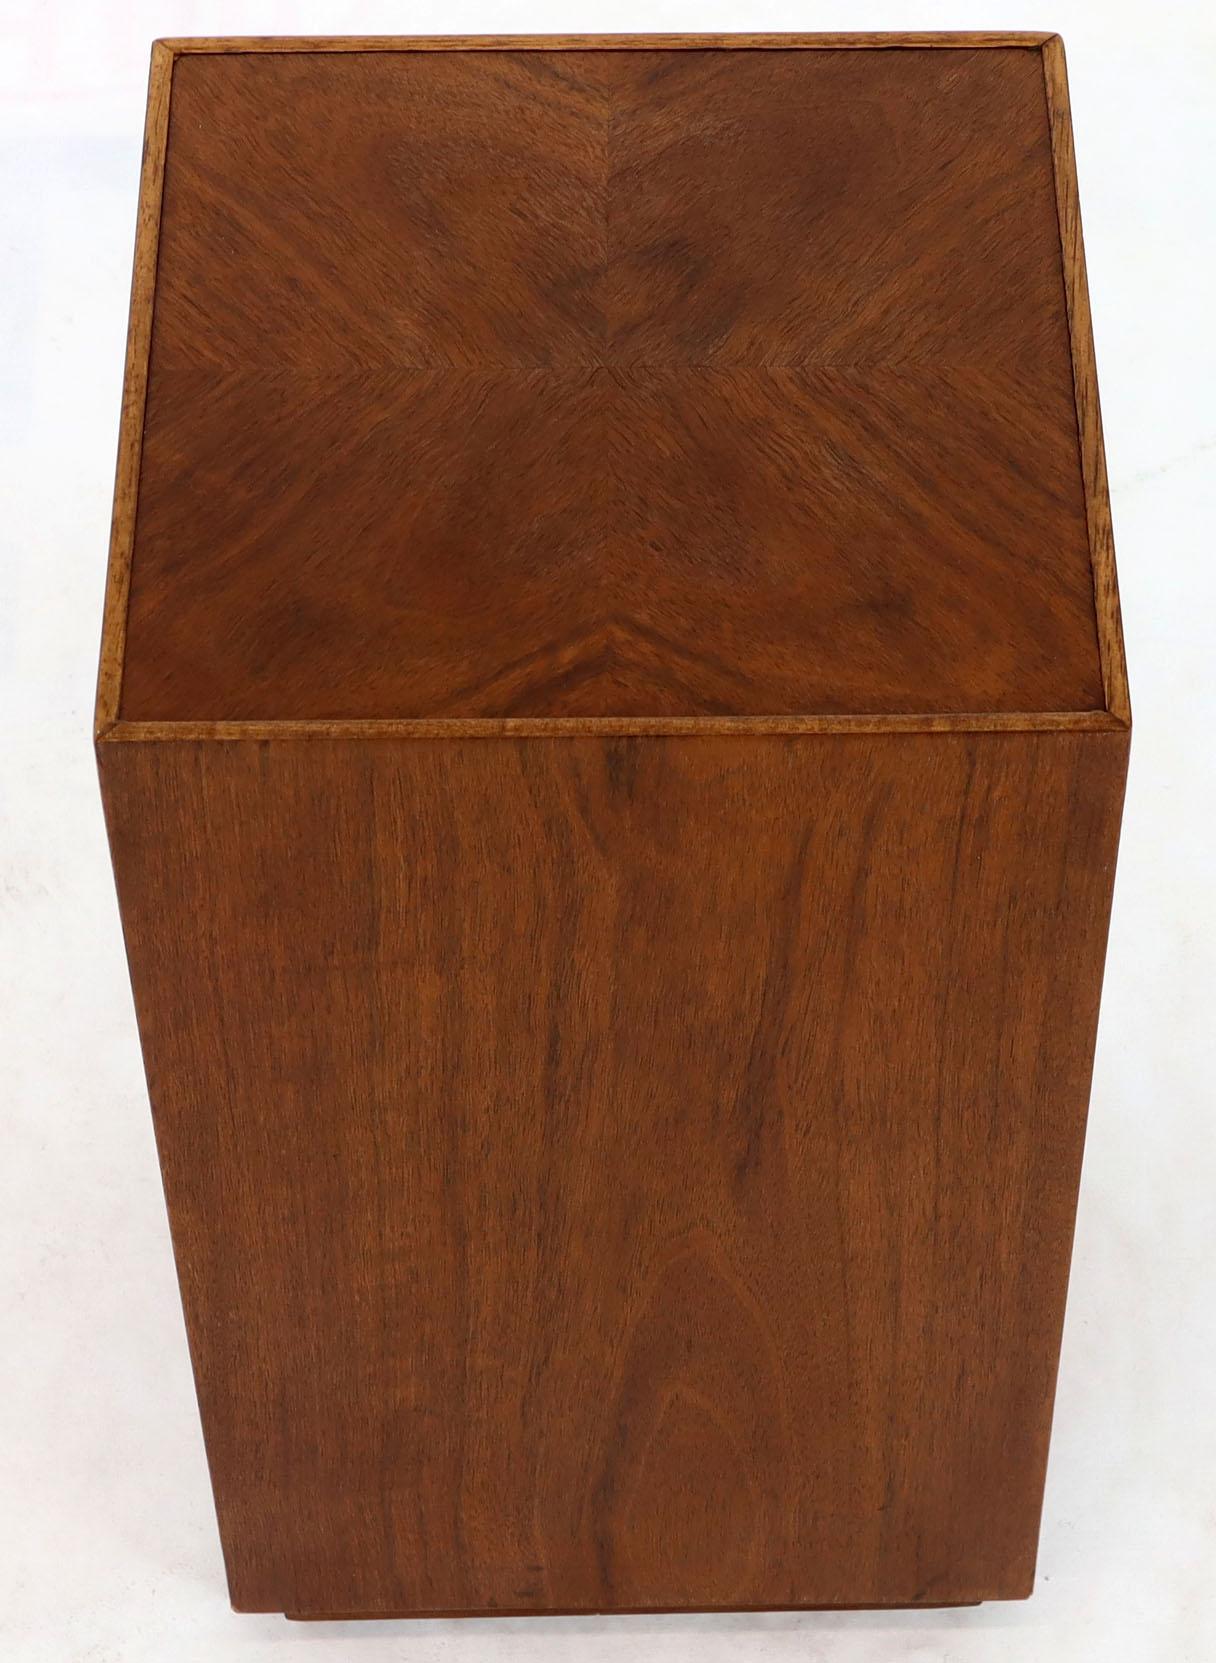 Lacquered Parquetry Top Walnut Square Pedestal Stand